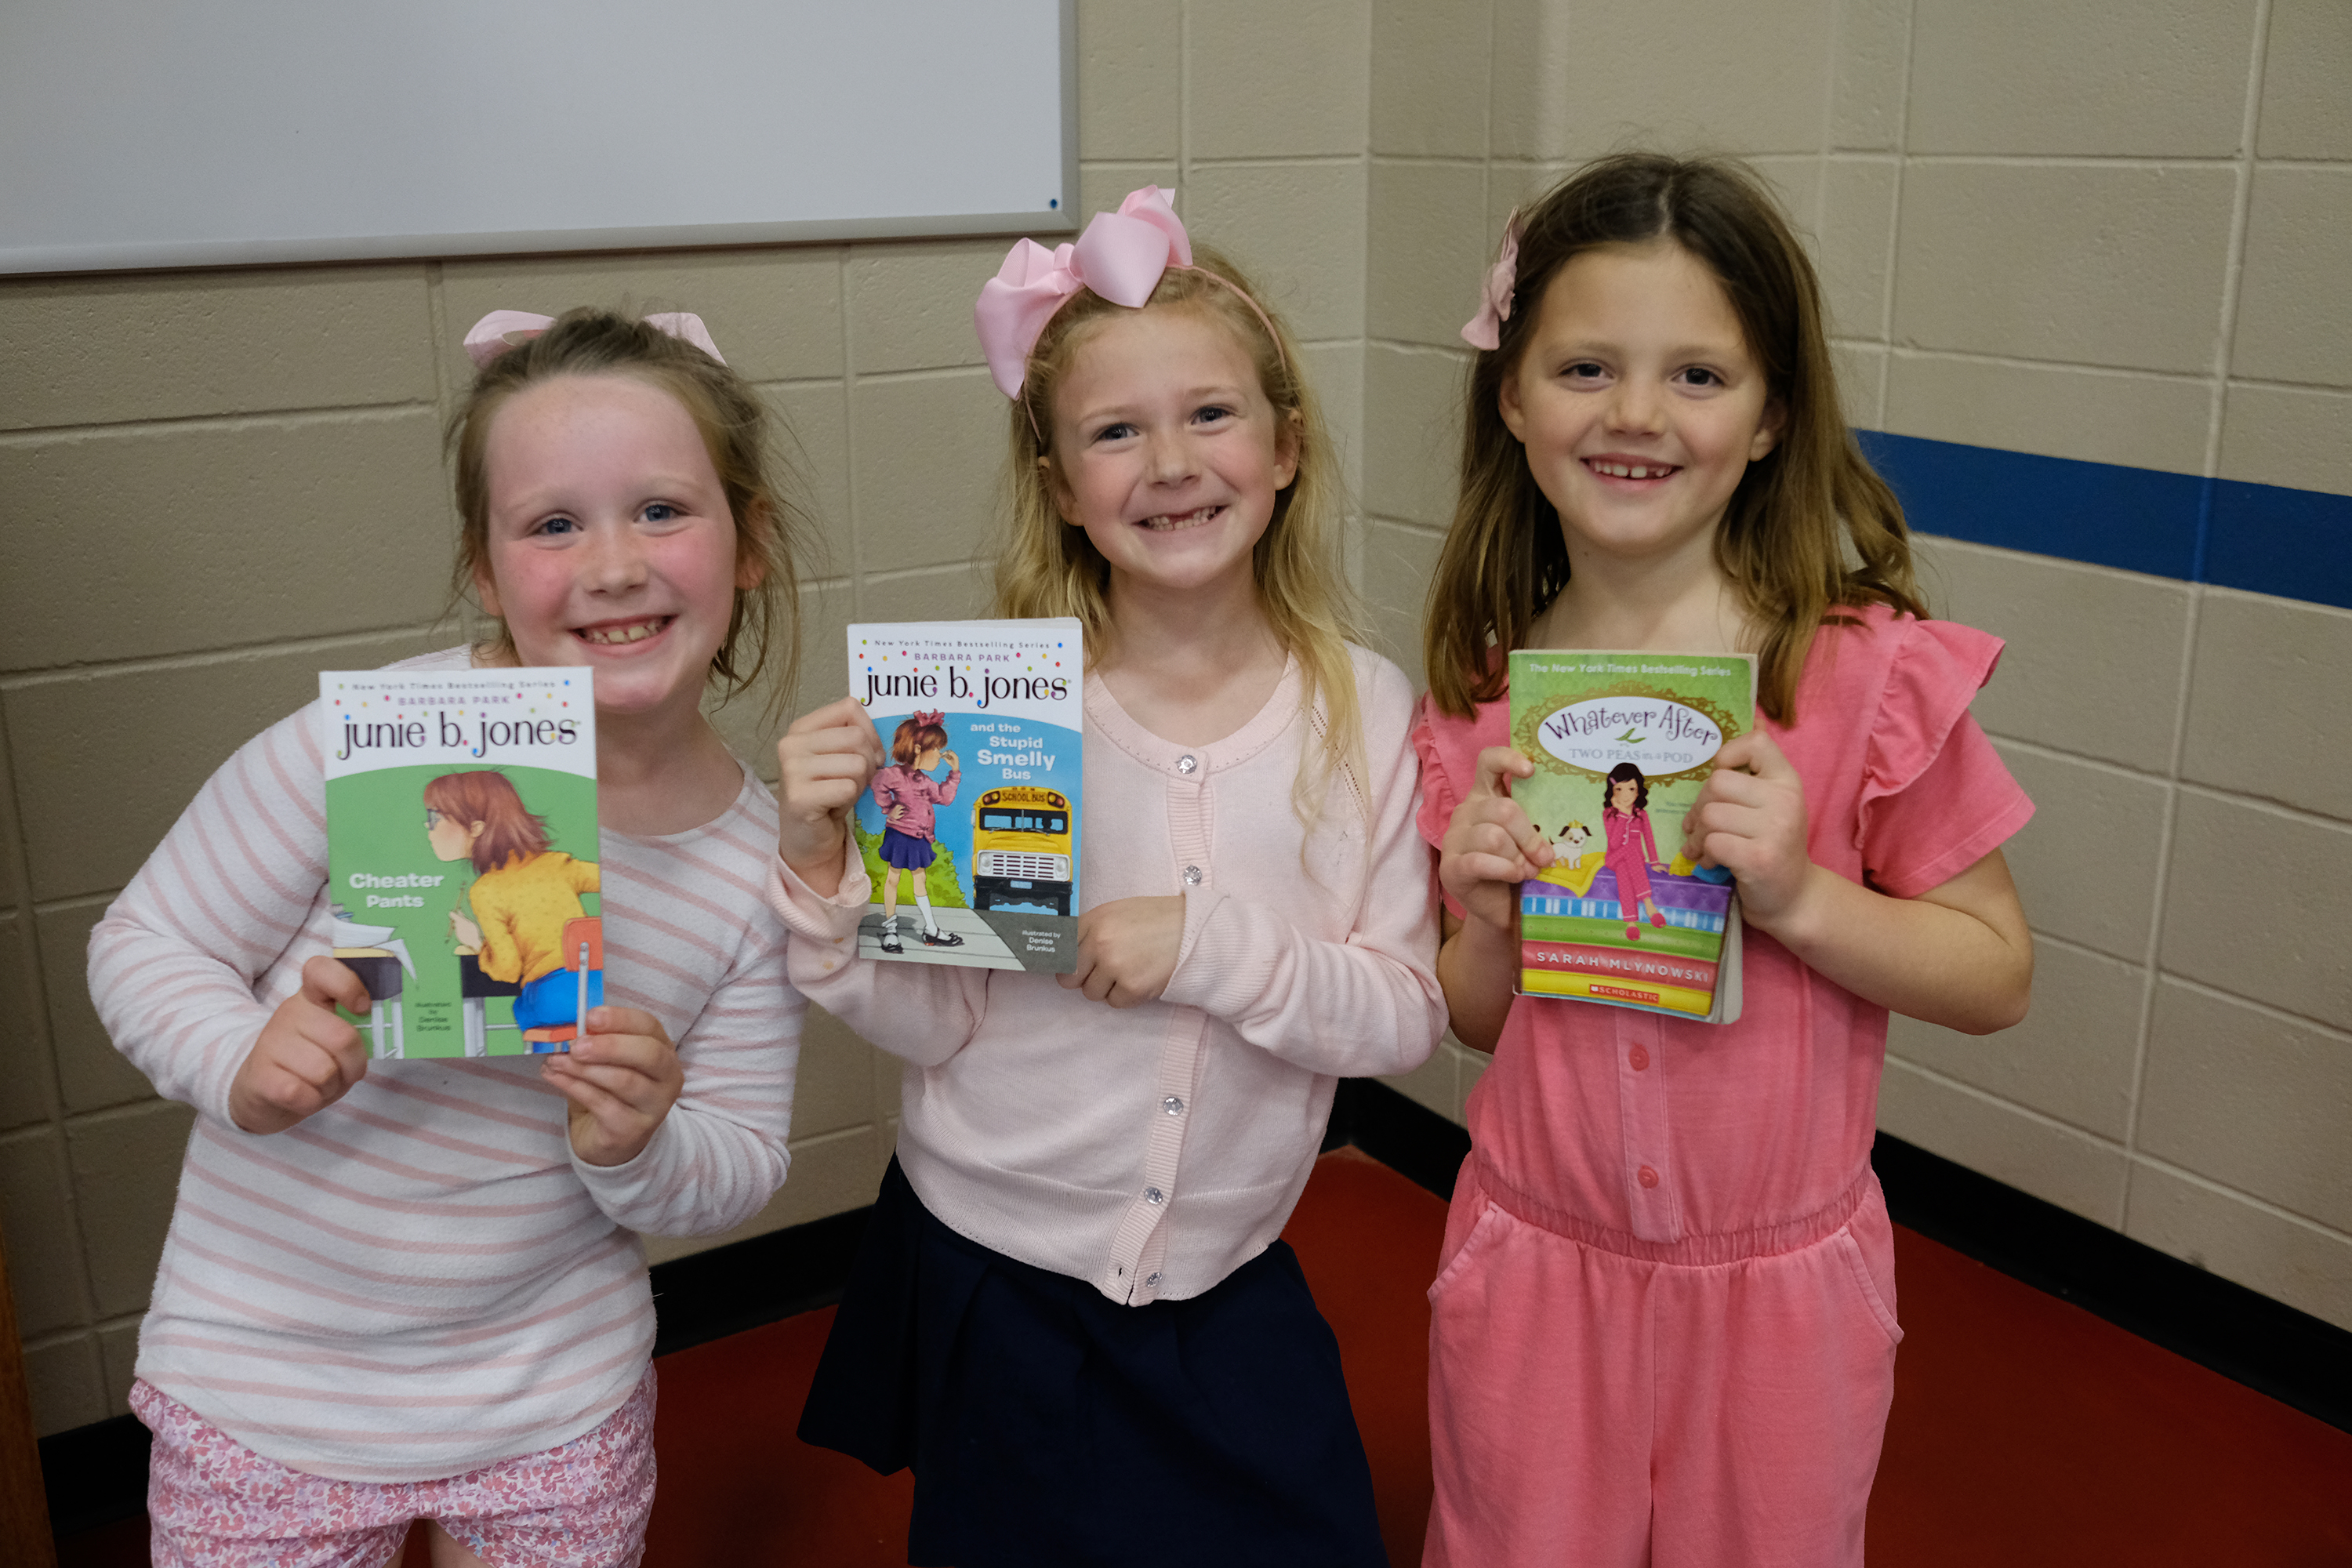 girls dressed as book characters